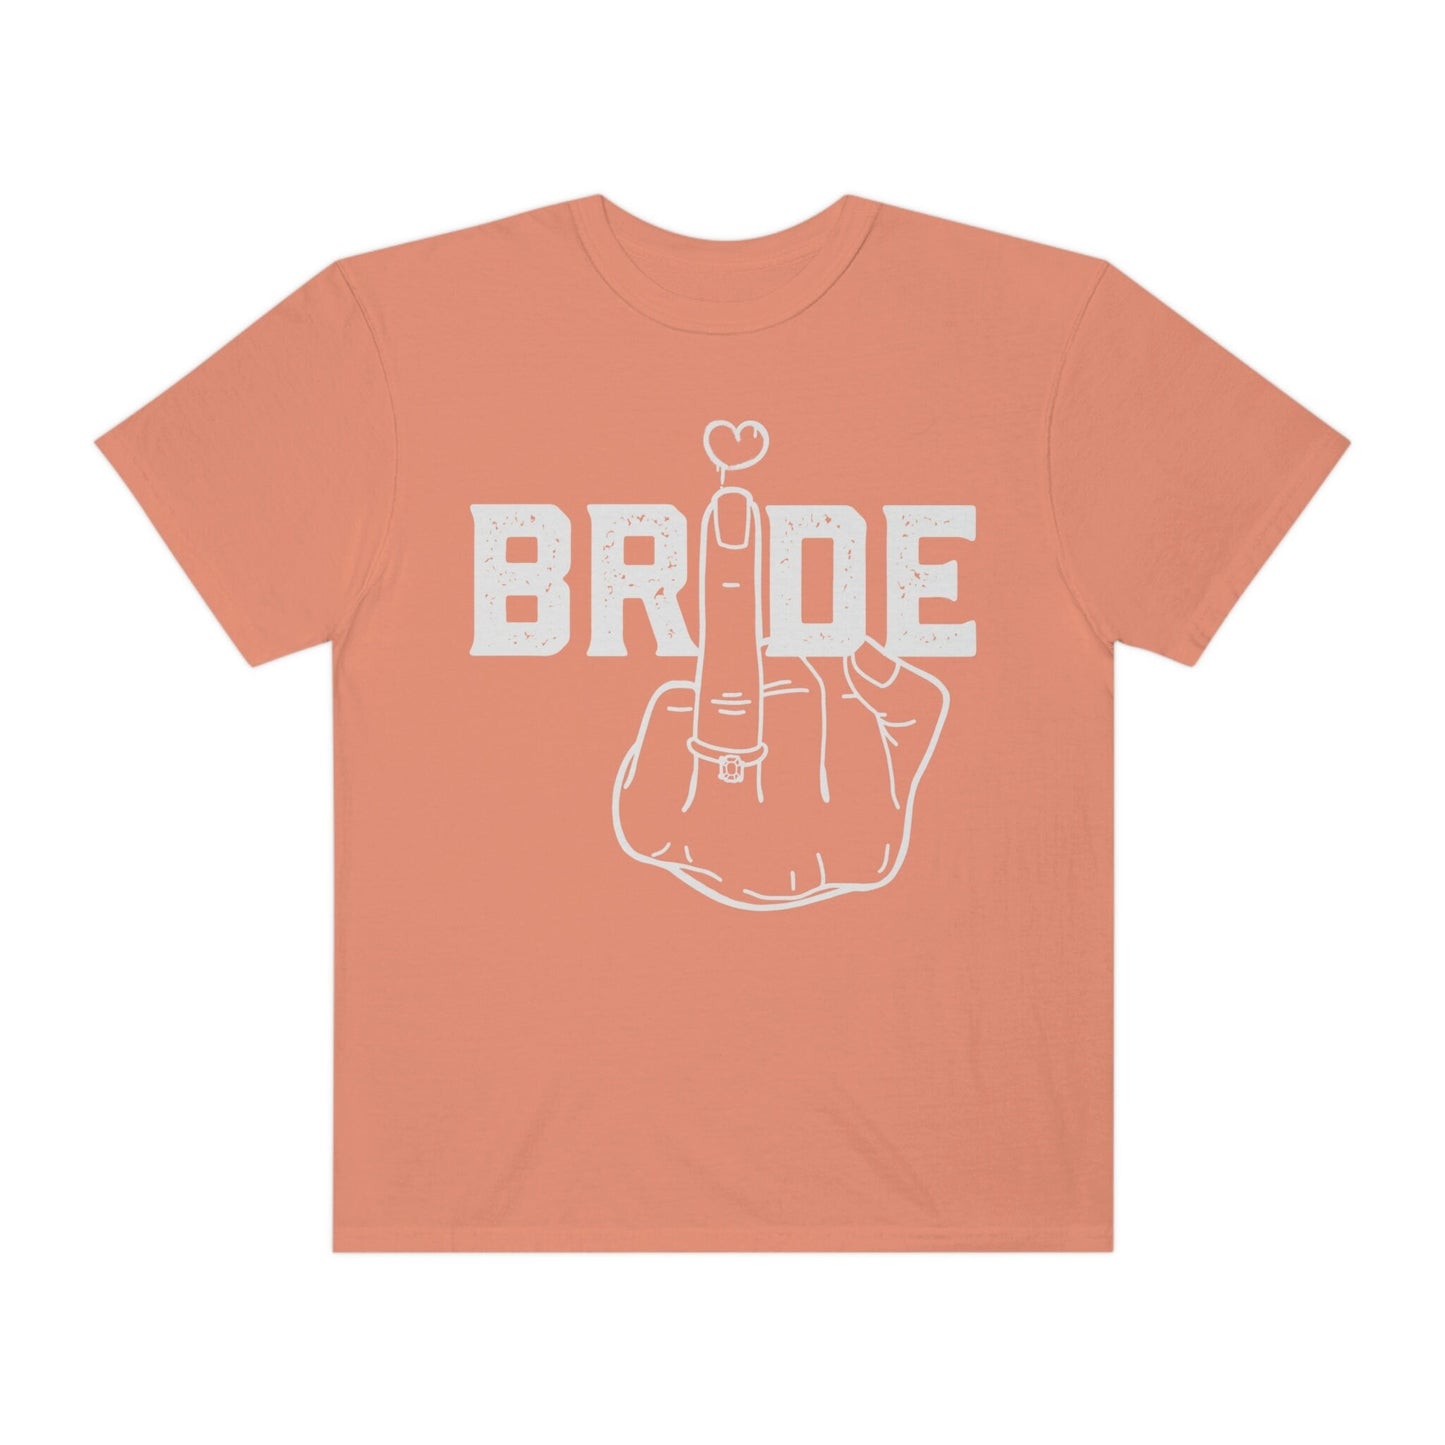 Bride Ring Finger Comfort colors Tshirt, Oversized Fiancee Tee, Cute Wedding Planning Outfit, Honeymoon Apparel Her, Bride Tribe, New Mrs